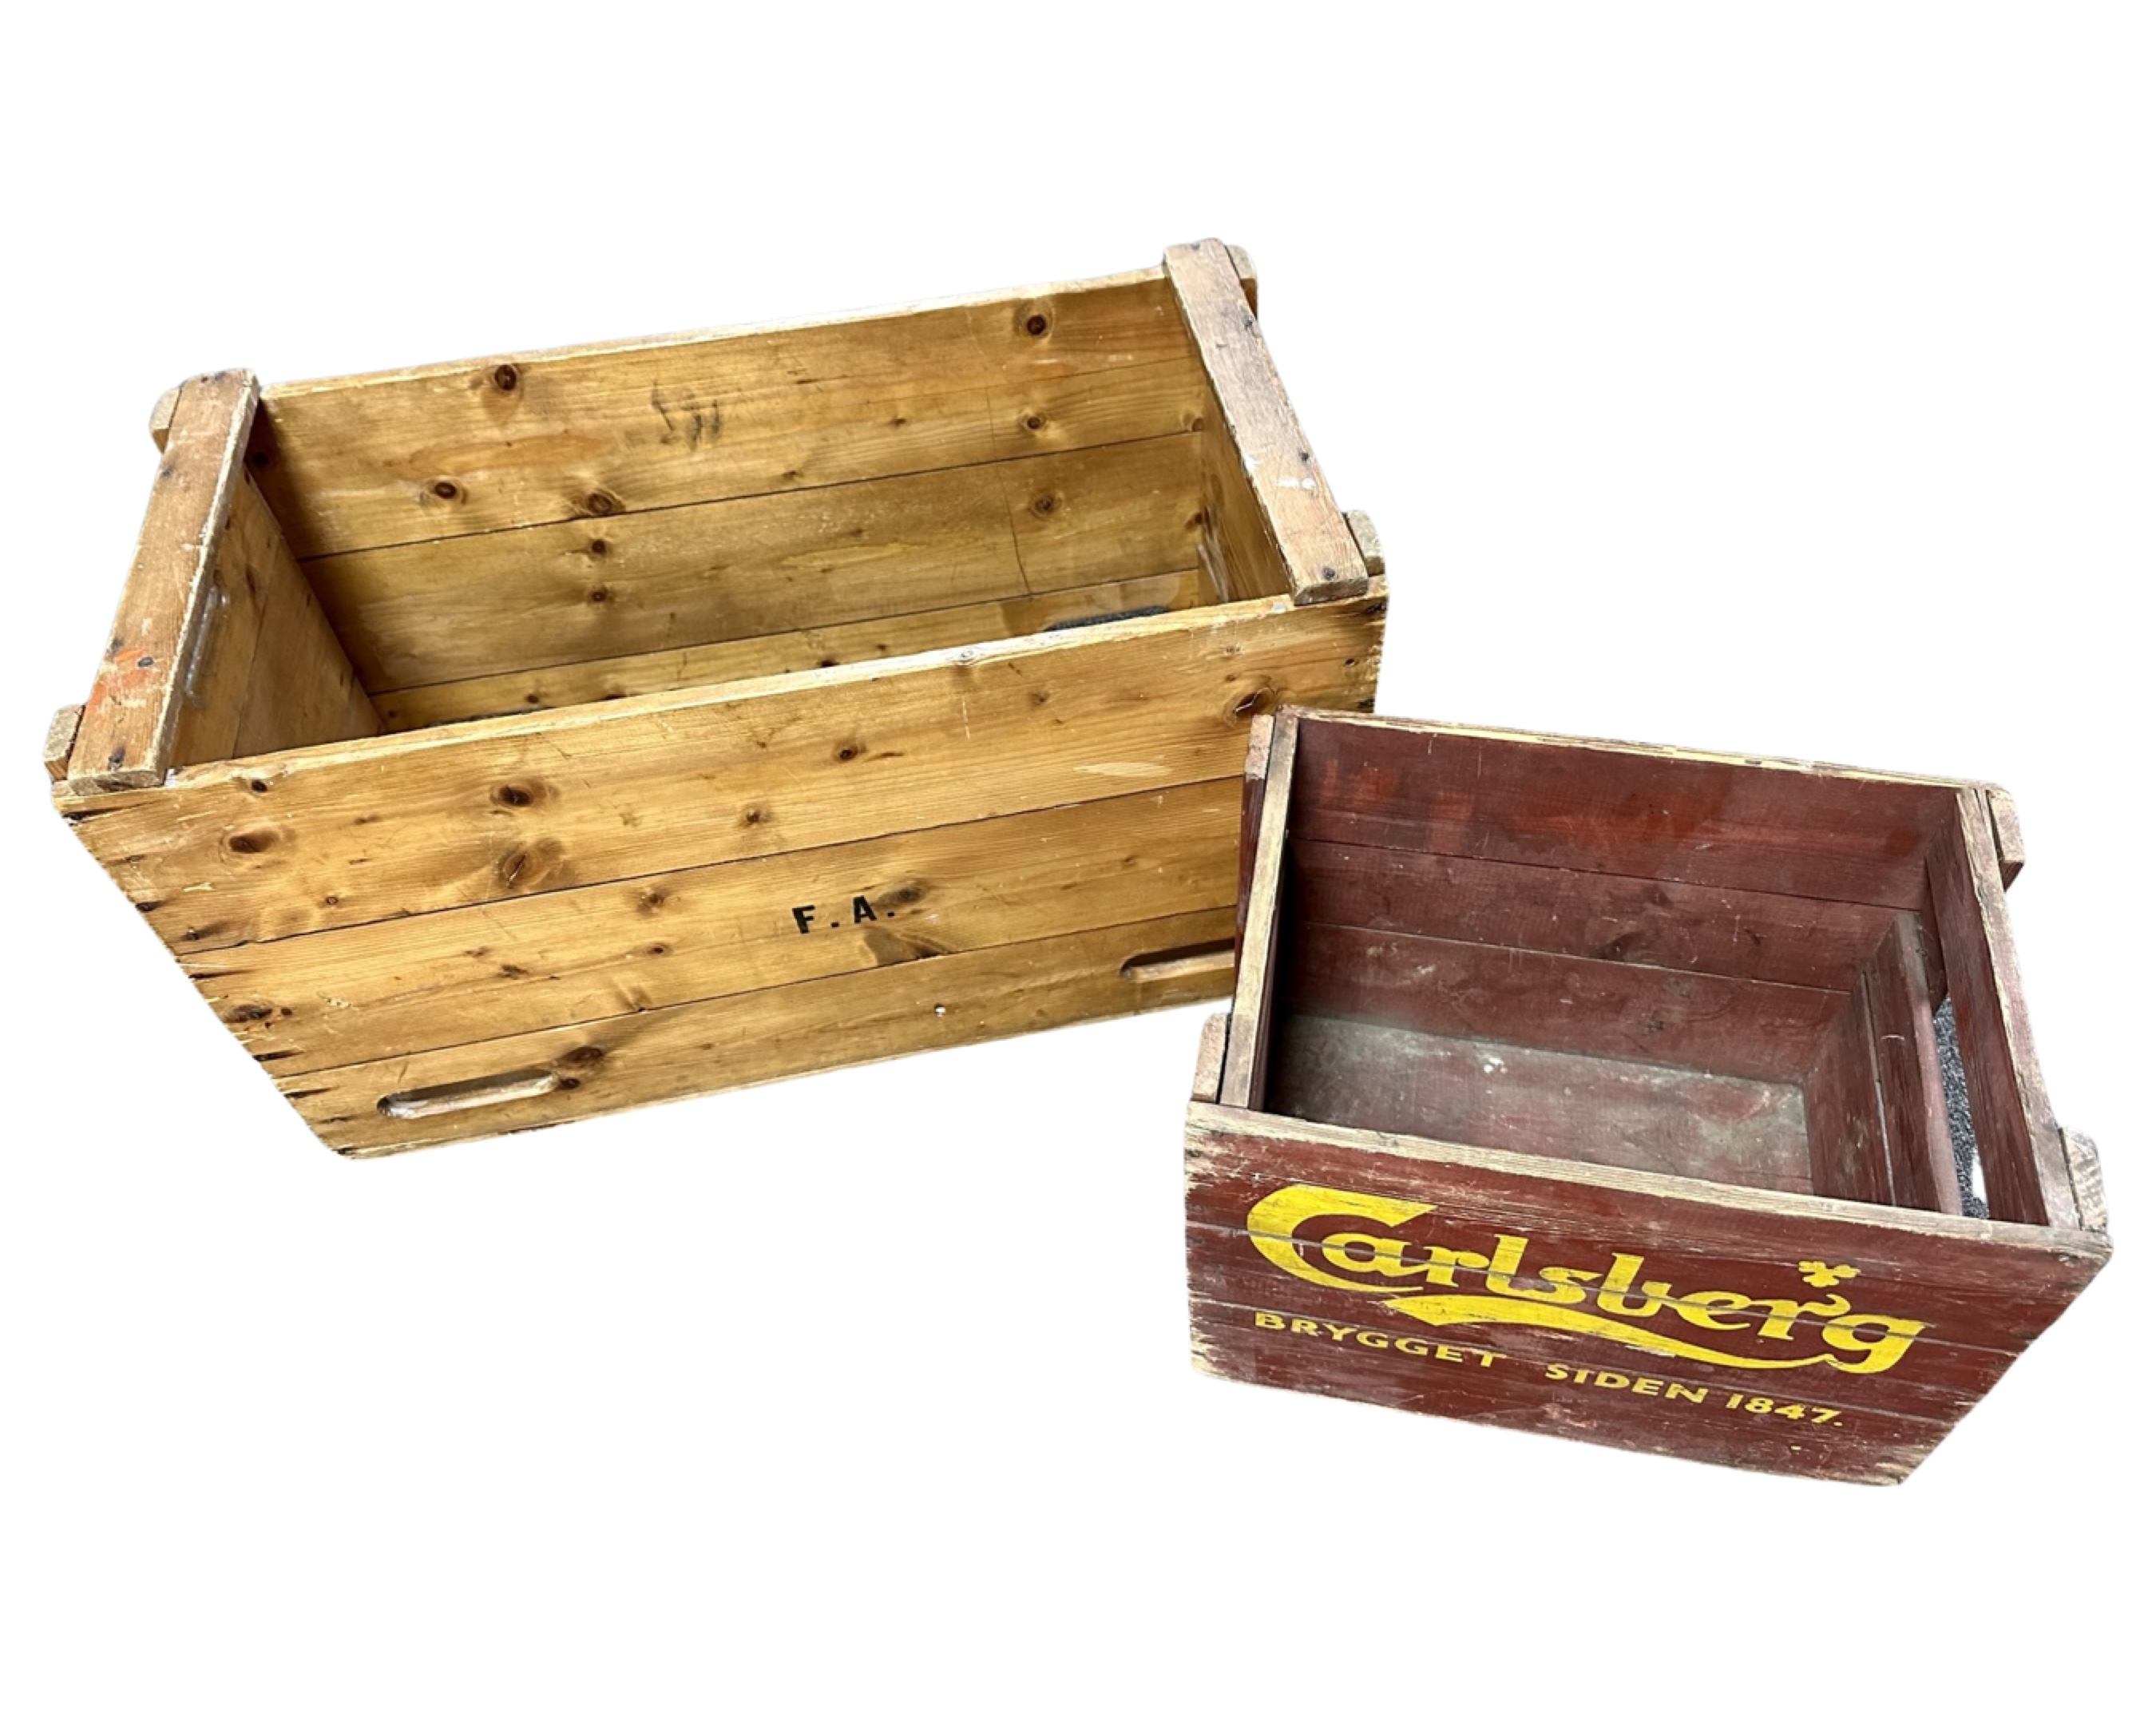 A pine crate together with a painted Carlsberg crate